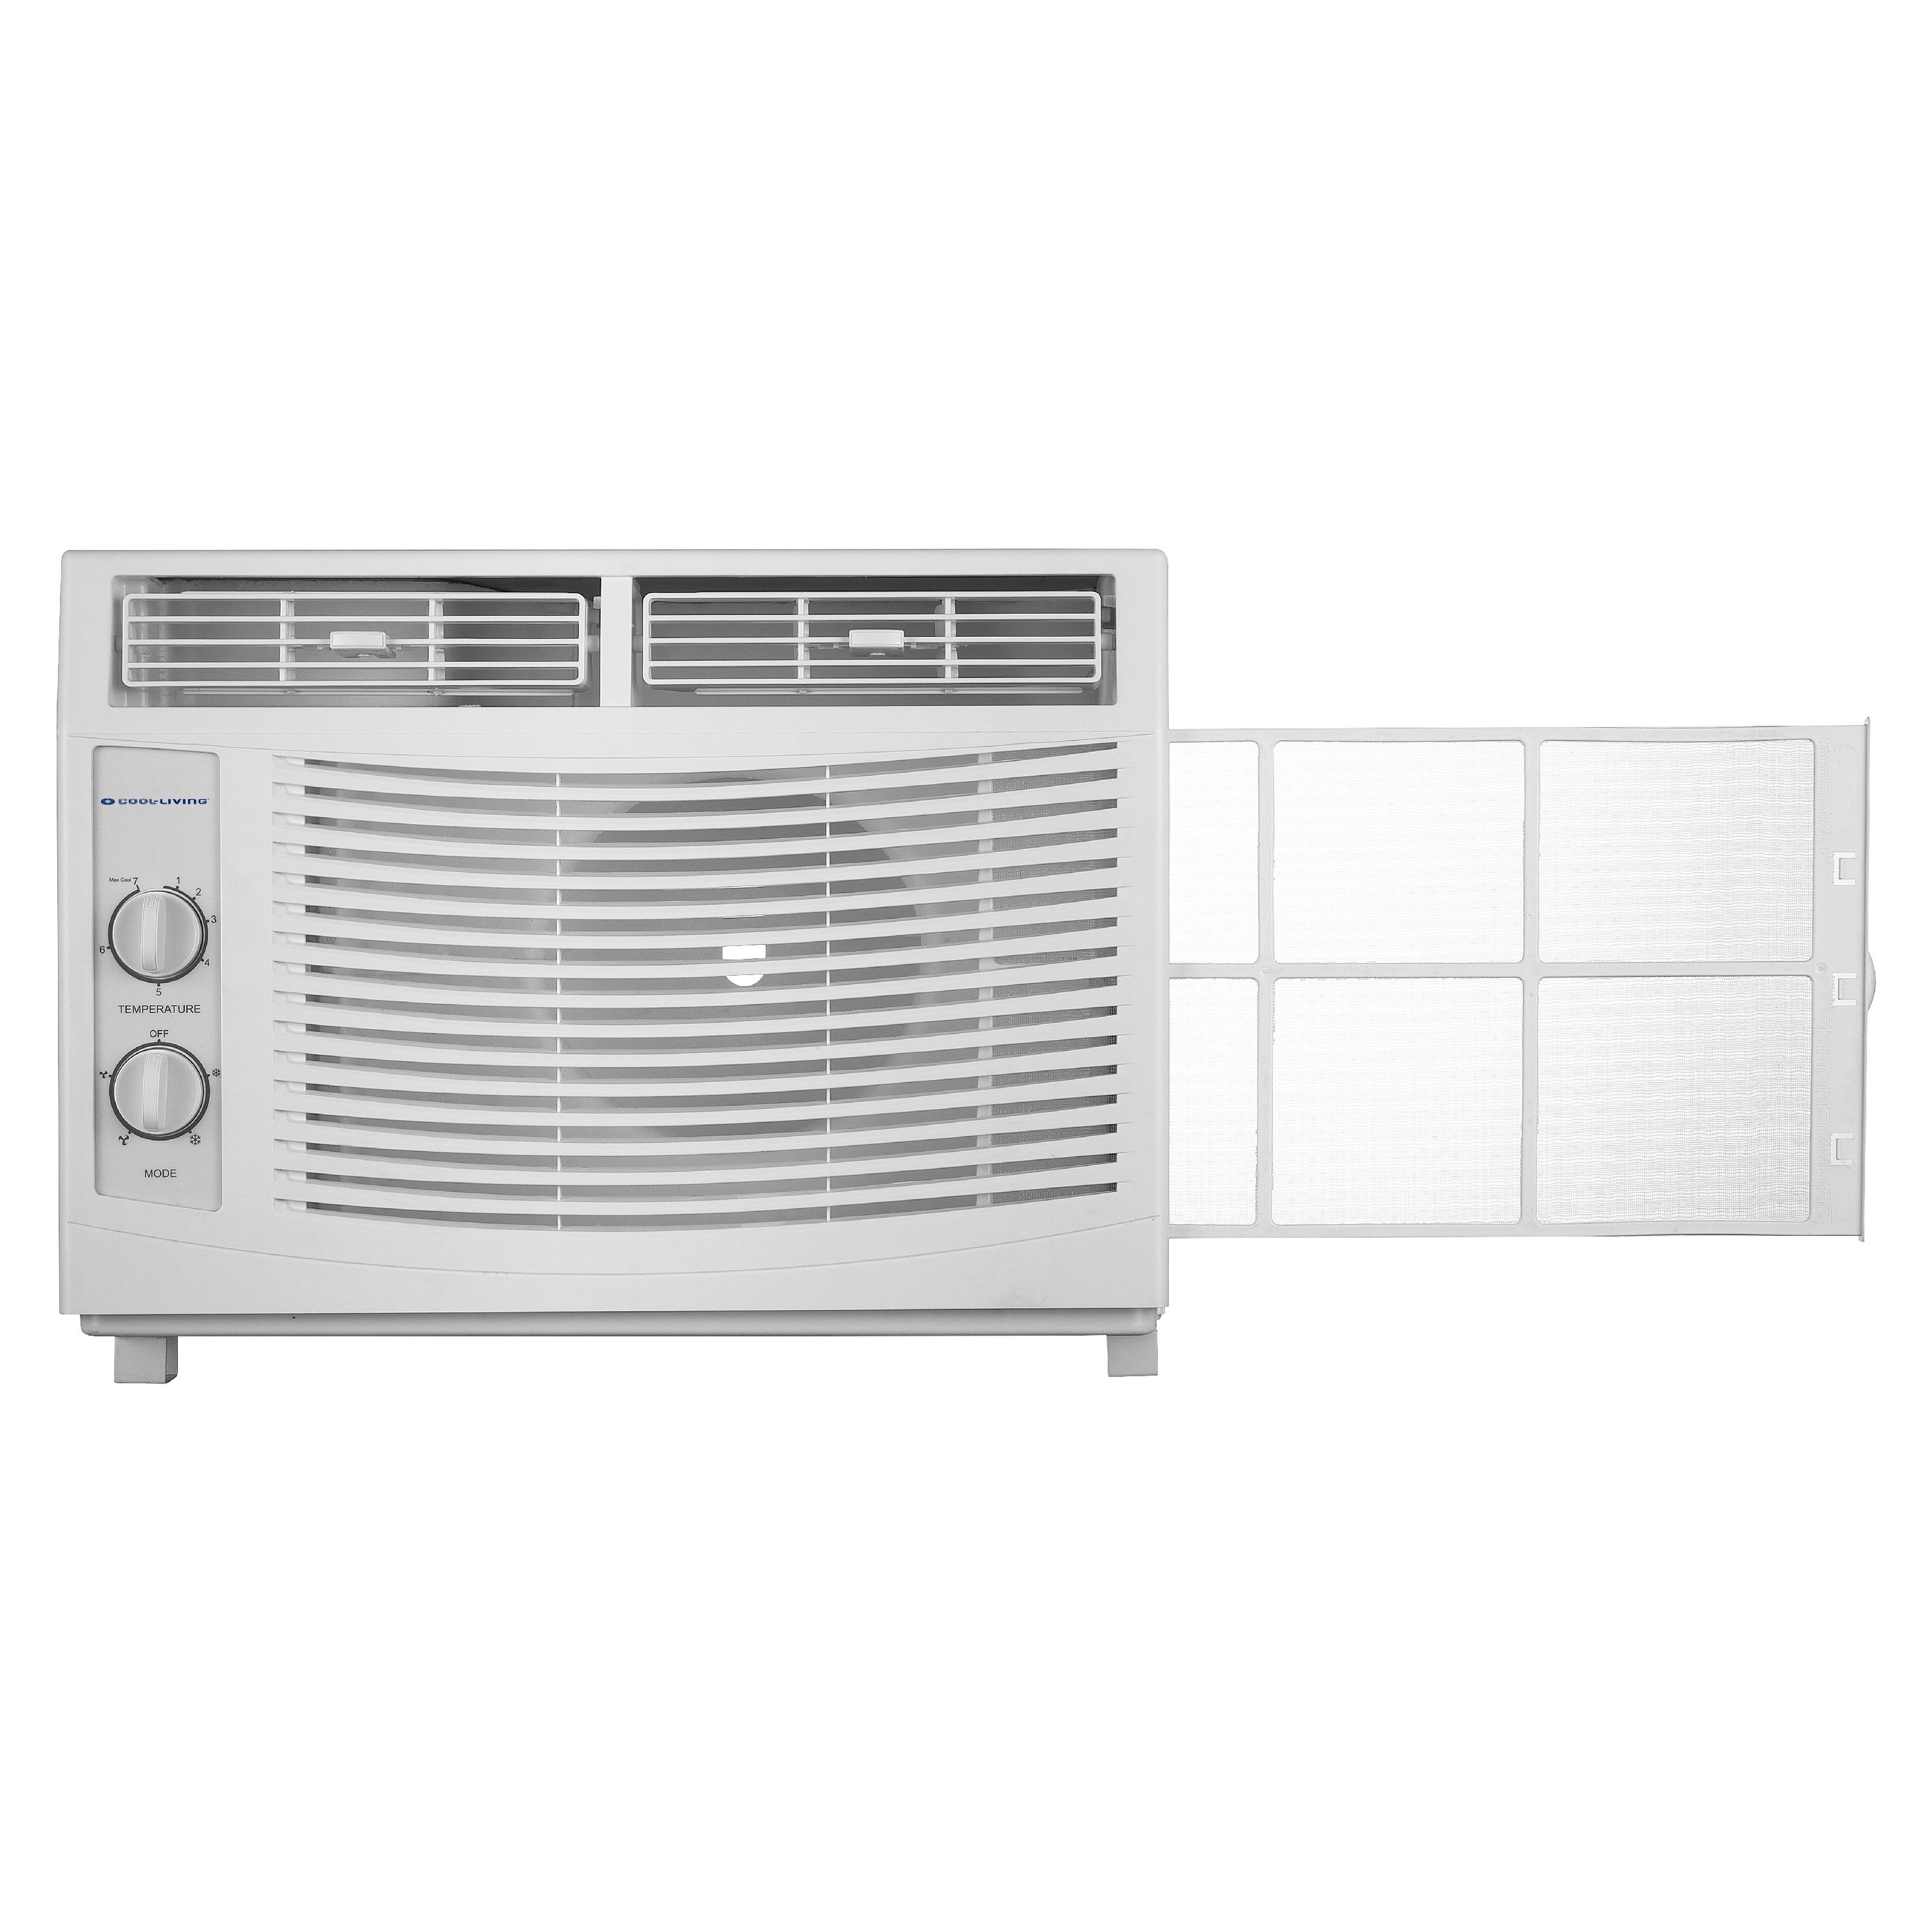 Cool-Living 5,000 BTU Window Air Conditioner with Installation Kit - image 5 of 5